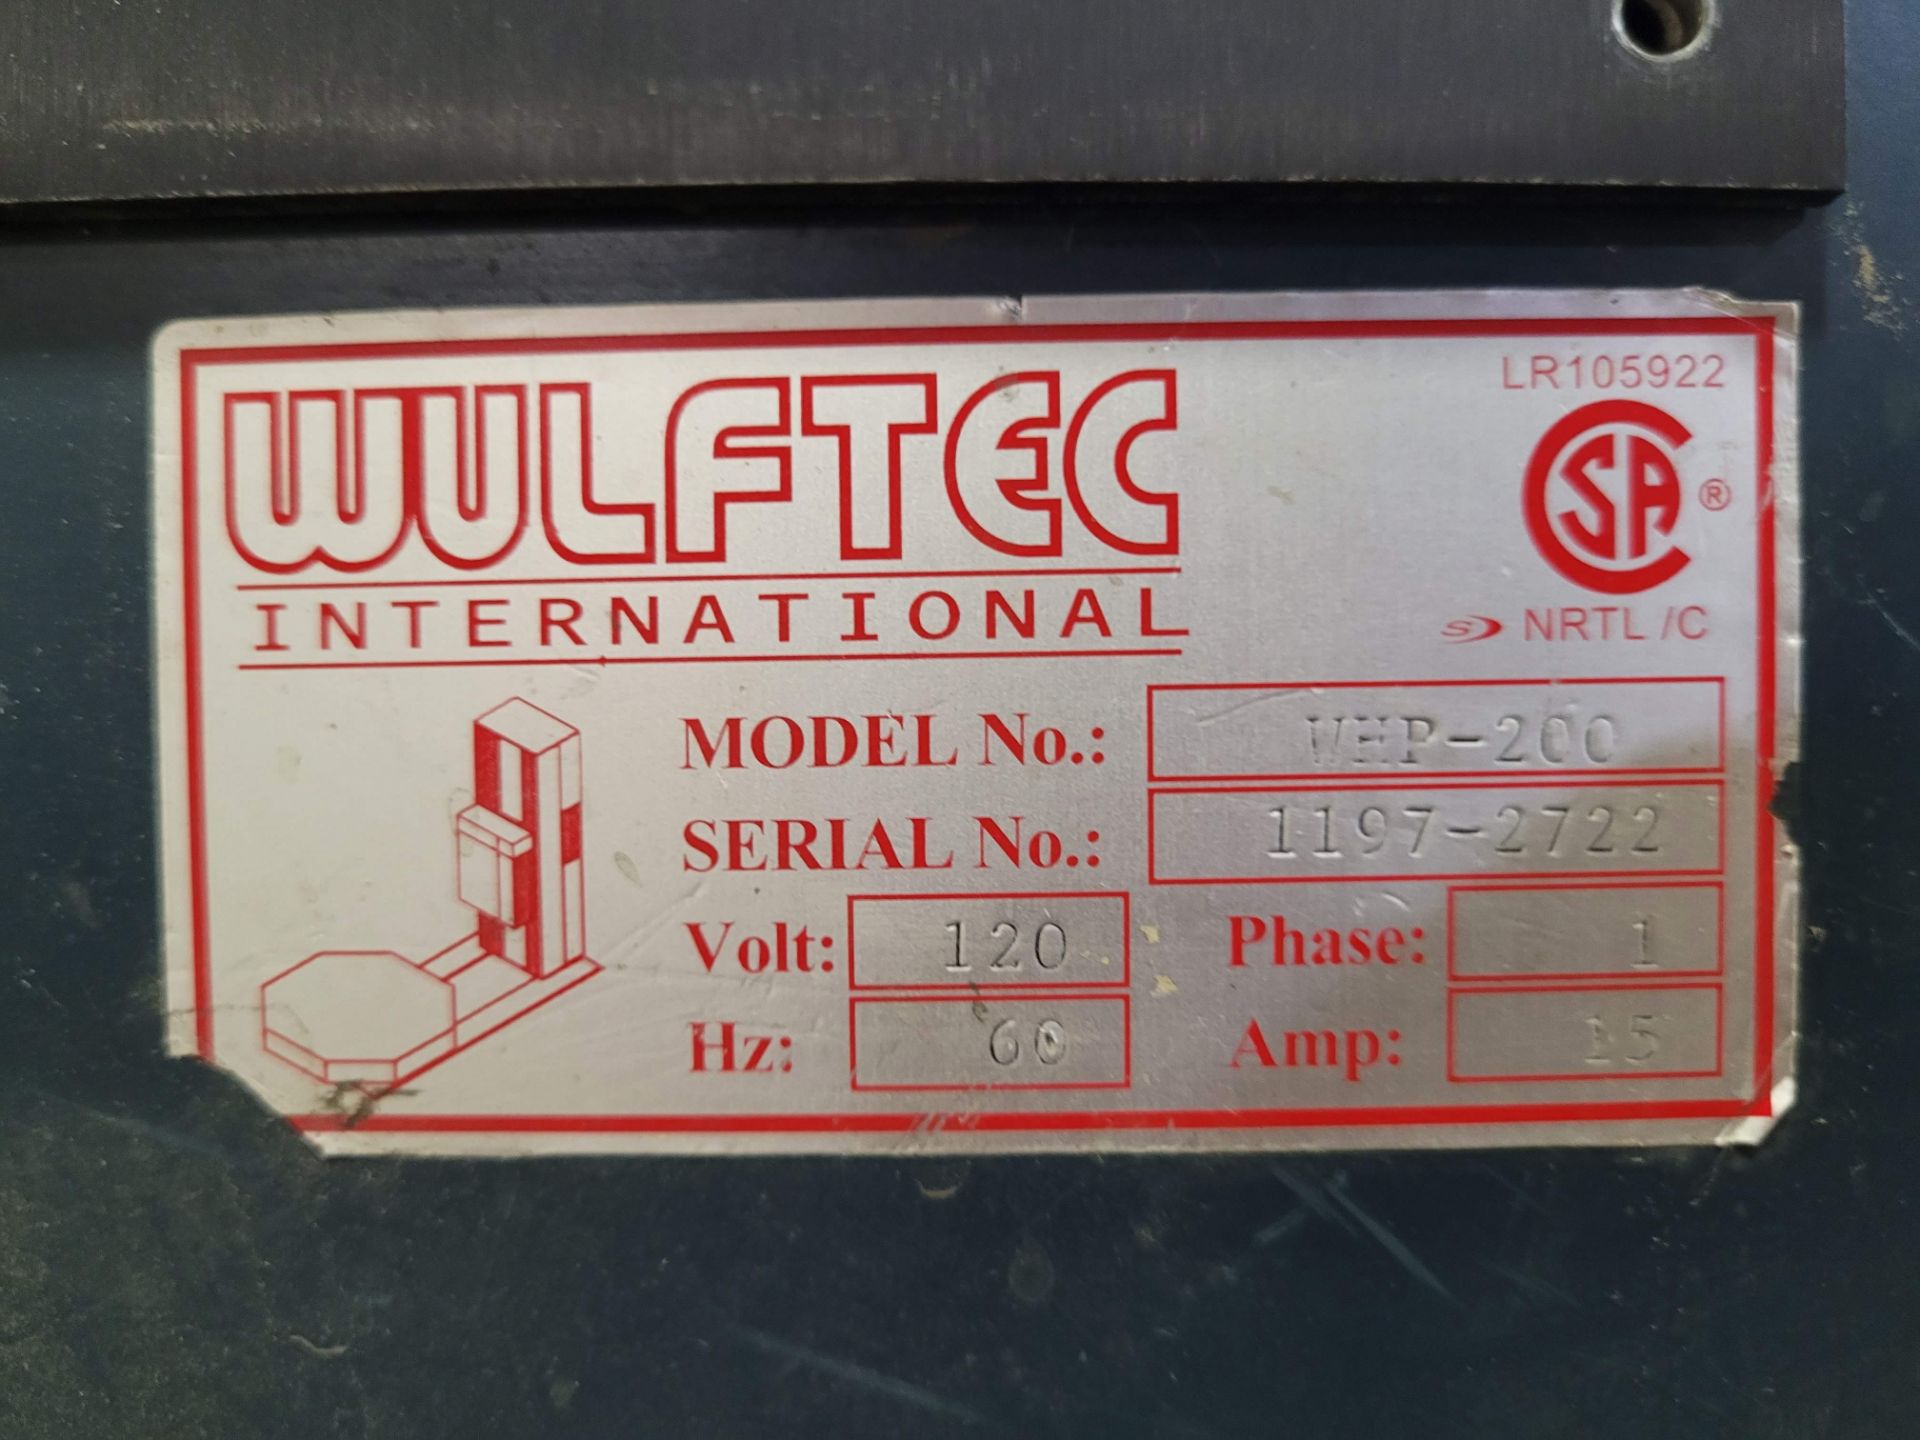 WULFTEC WHP-200 HIGH PROFILE TURNTABLE TYPE AUTOMATIC PALLET WRAPPER, S/N 1197-2722 - Image 4 of 4